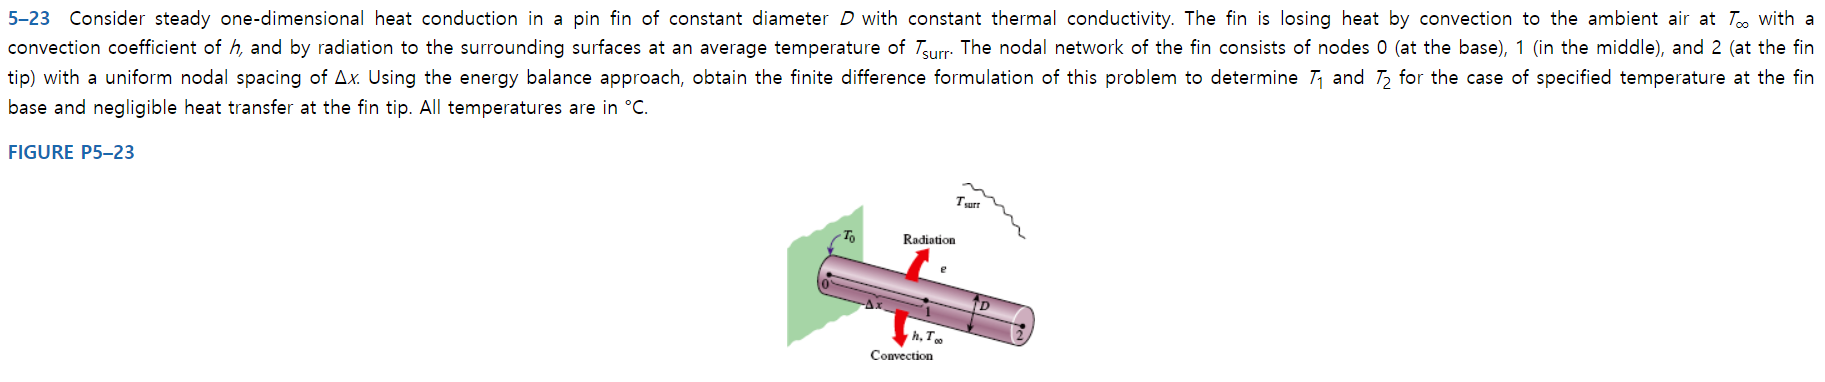 5-23 Consider steady one-dimensional heat conduction in a pin fin of constant diameter D with constant thermal conductivity. The fin is losing heat by convection to the ambient air at Too with a
convection coefficient of h, and by radiation to the surrounding surfaces at an average temperature of Turr The nodal network of the fin consists of nodes 0 (at the base), 1 (in the middle), and 2 (at the fin
tip) with a uniform nodal spacing of Ax. Using the energy balance approach, obtain the finite difference formulation of this problem to determine Tand T for the case of specified temperature at the fin
base and negligible heat transfer at the fin tip. All temperatures are in °C
FIGURE P5-23
Turr
To
Radiation
e
h, To
Convection
